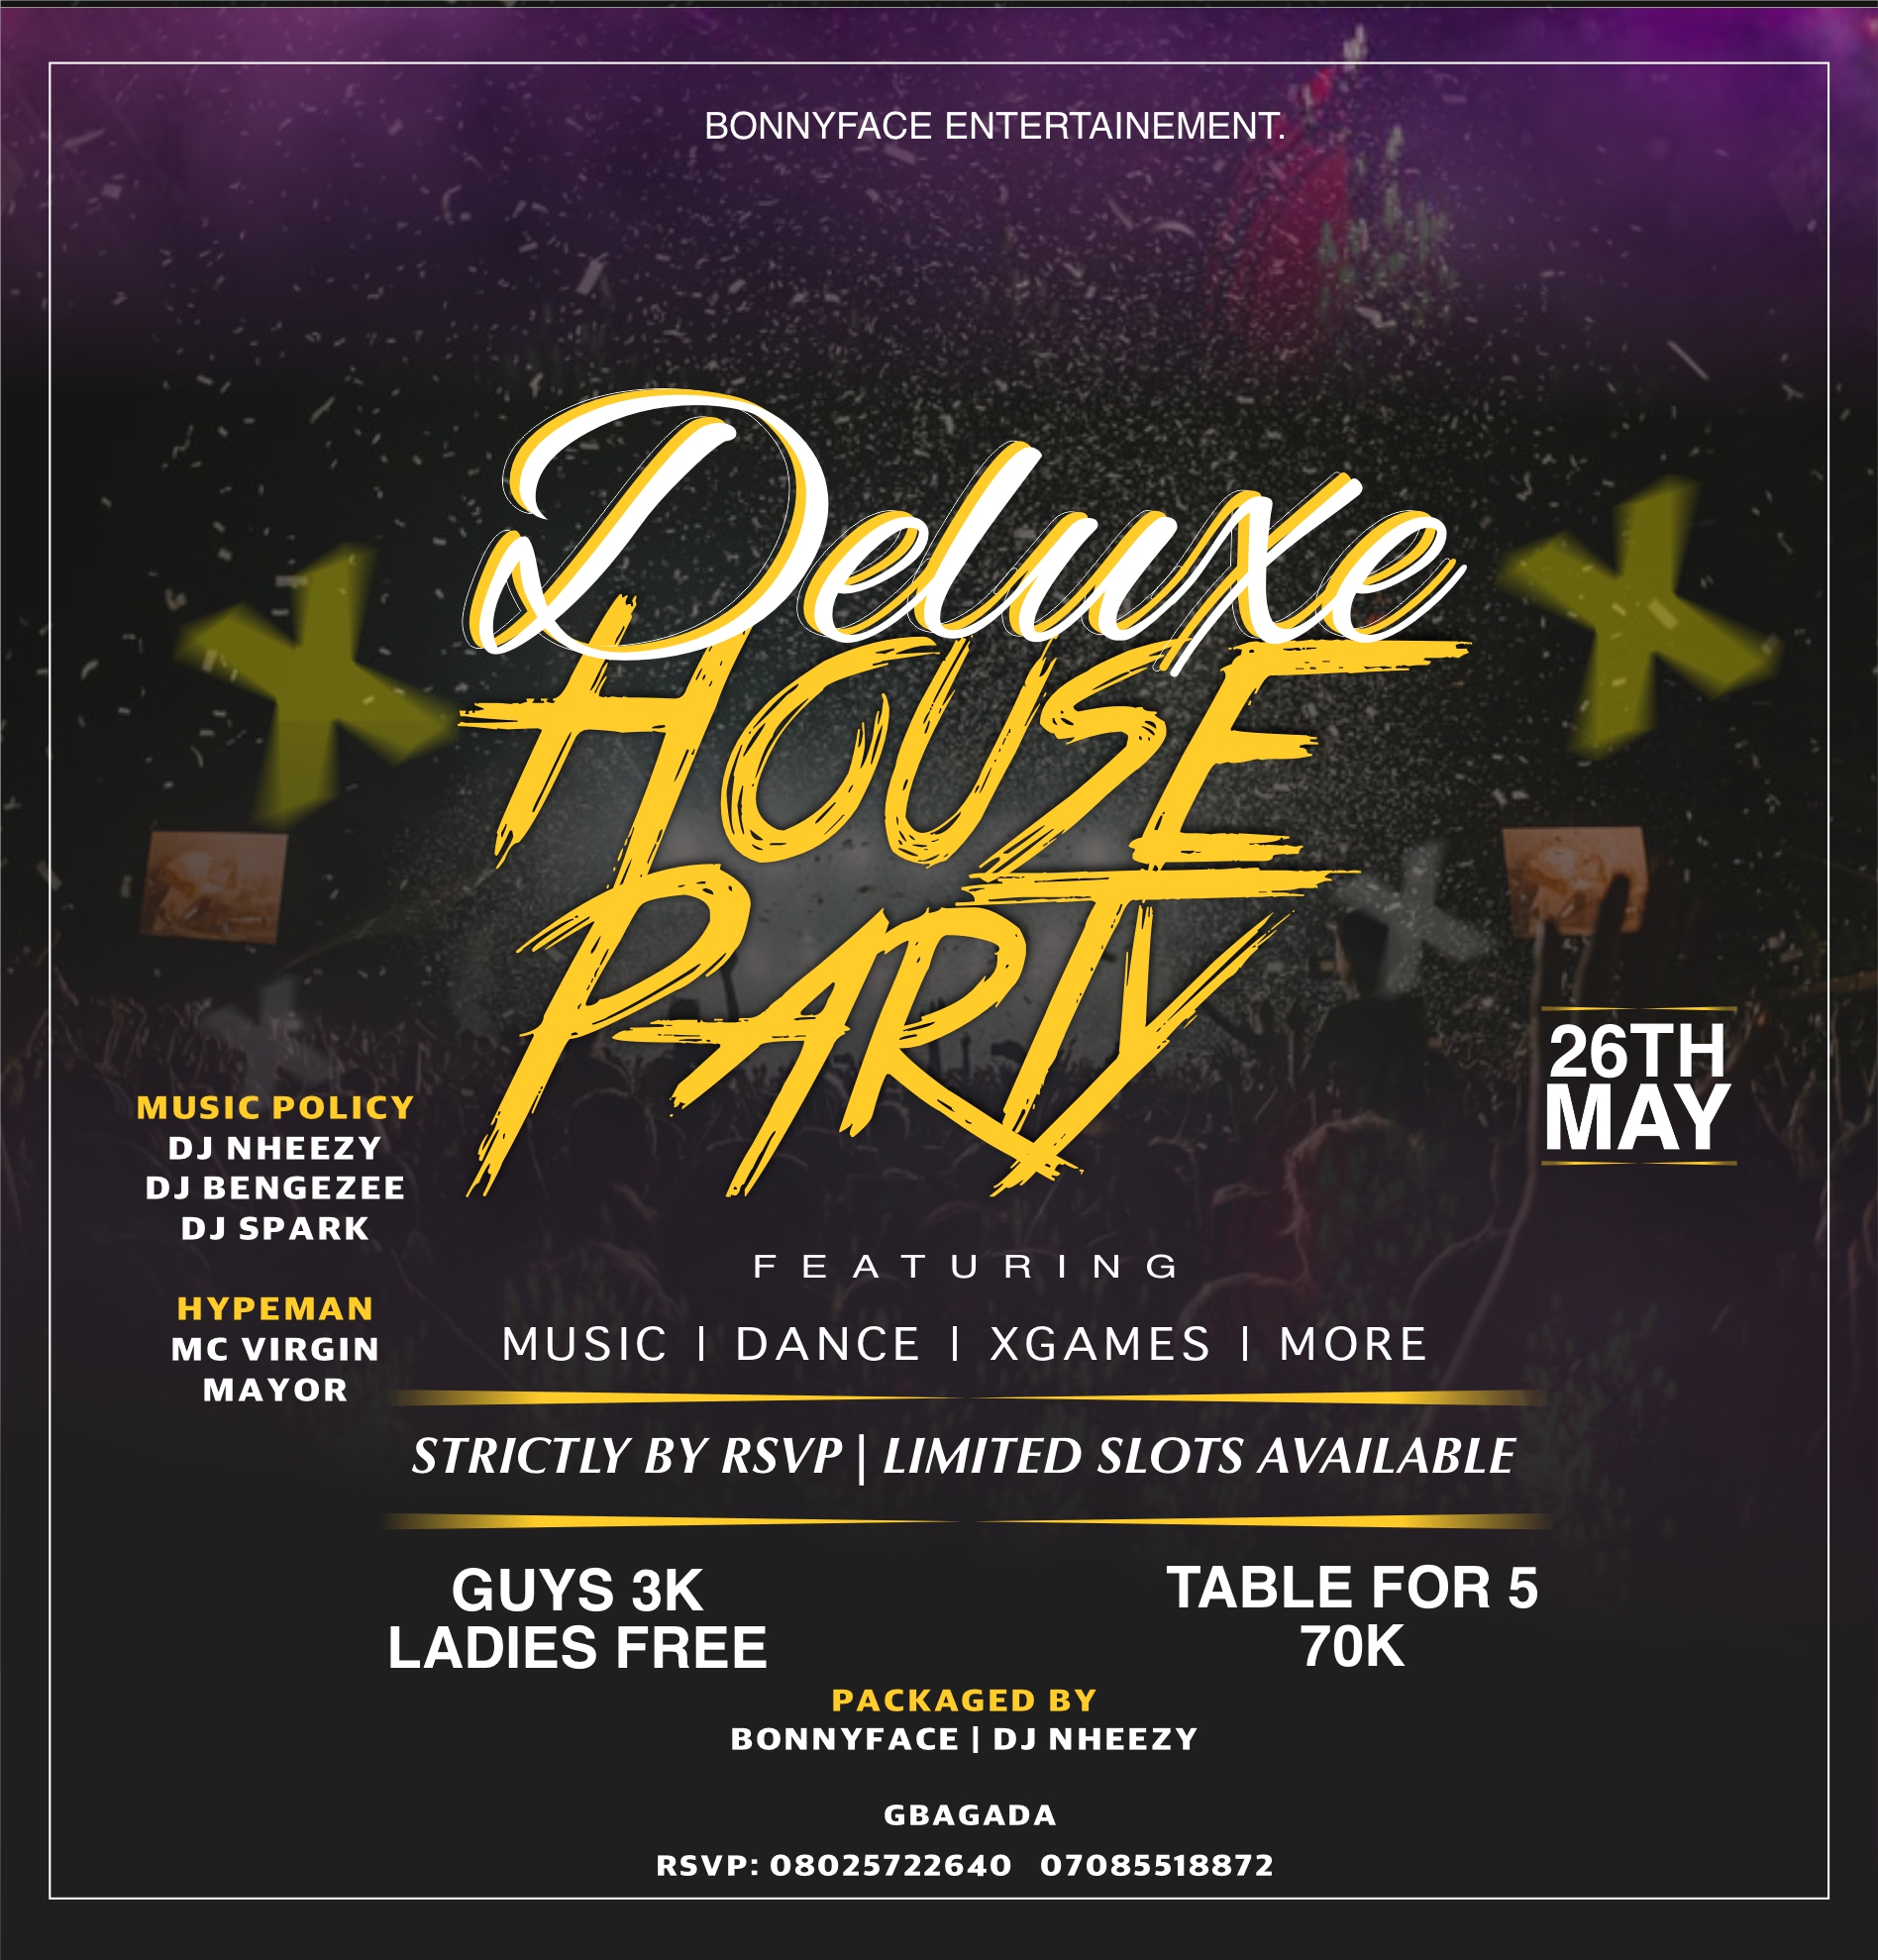 DELUXE HOUSE PARTY Post free event in Nigeria using tickethub.ng, buy and sell tickets to event